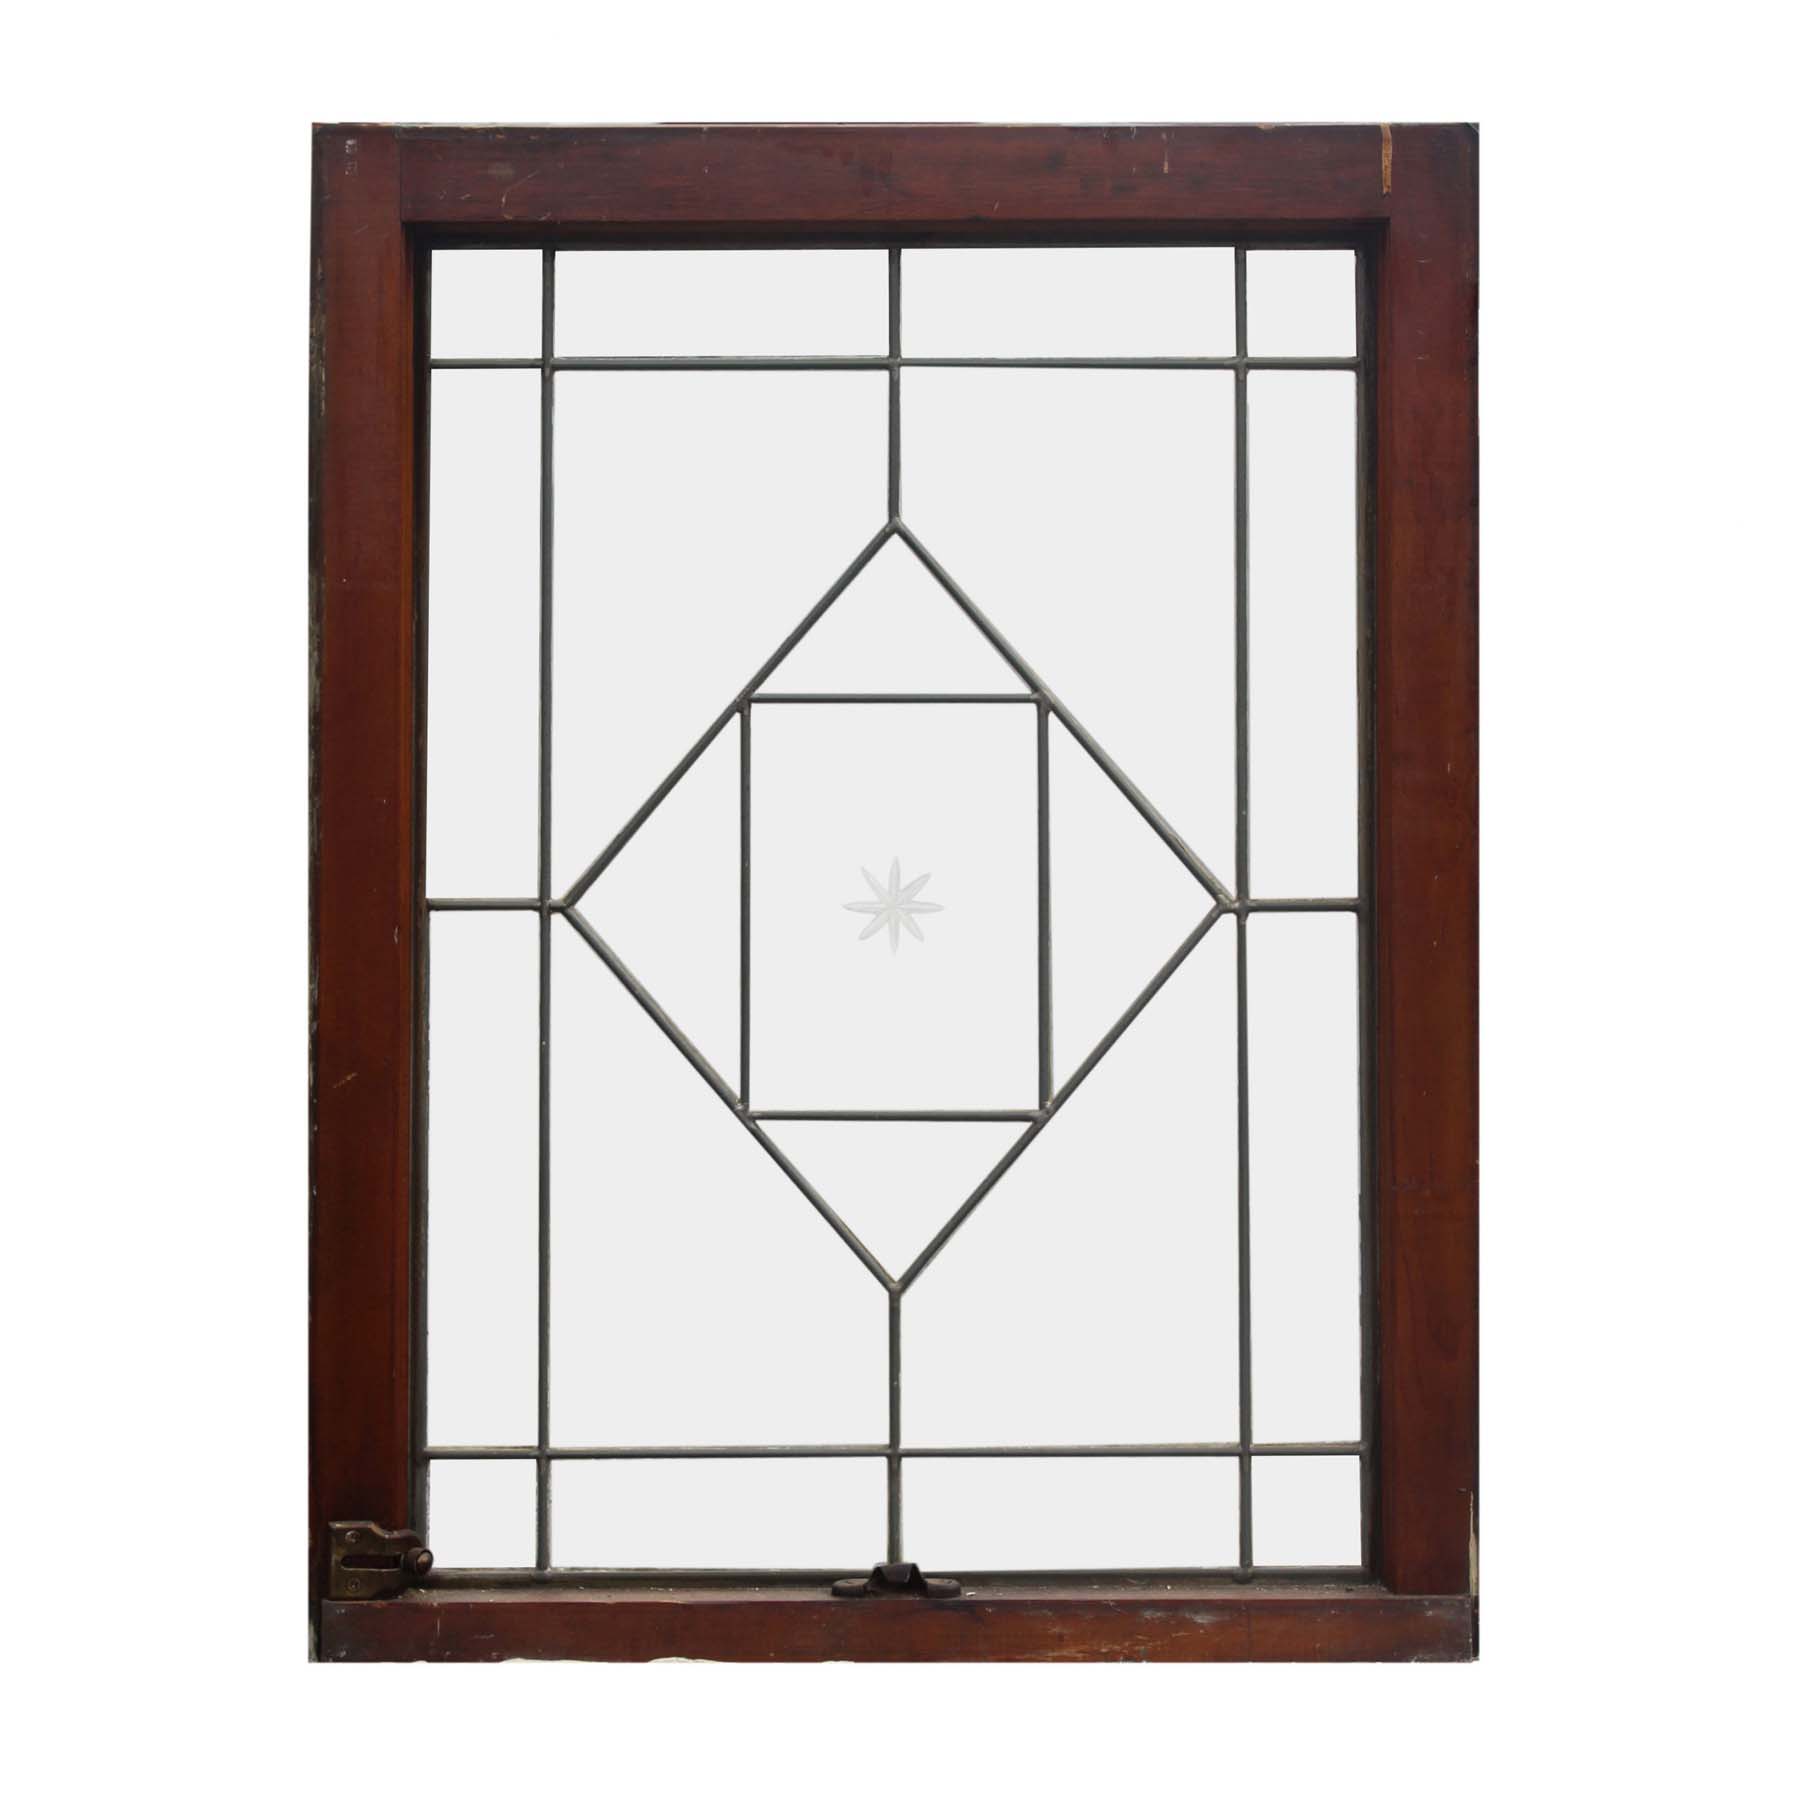 SOLD Antique American Beveled & Leaded Glass Windows, Hand-Cut Star-0